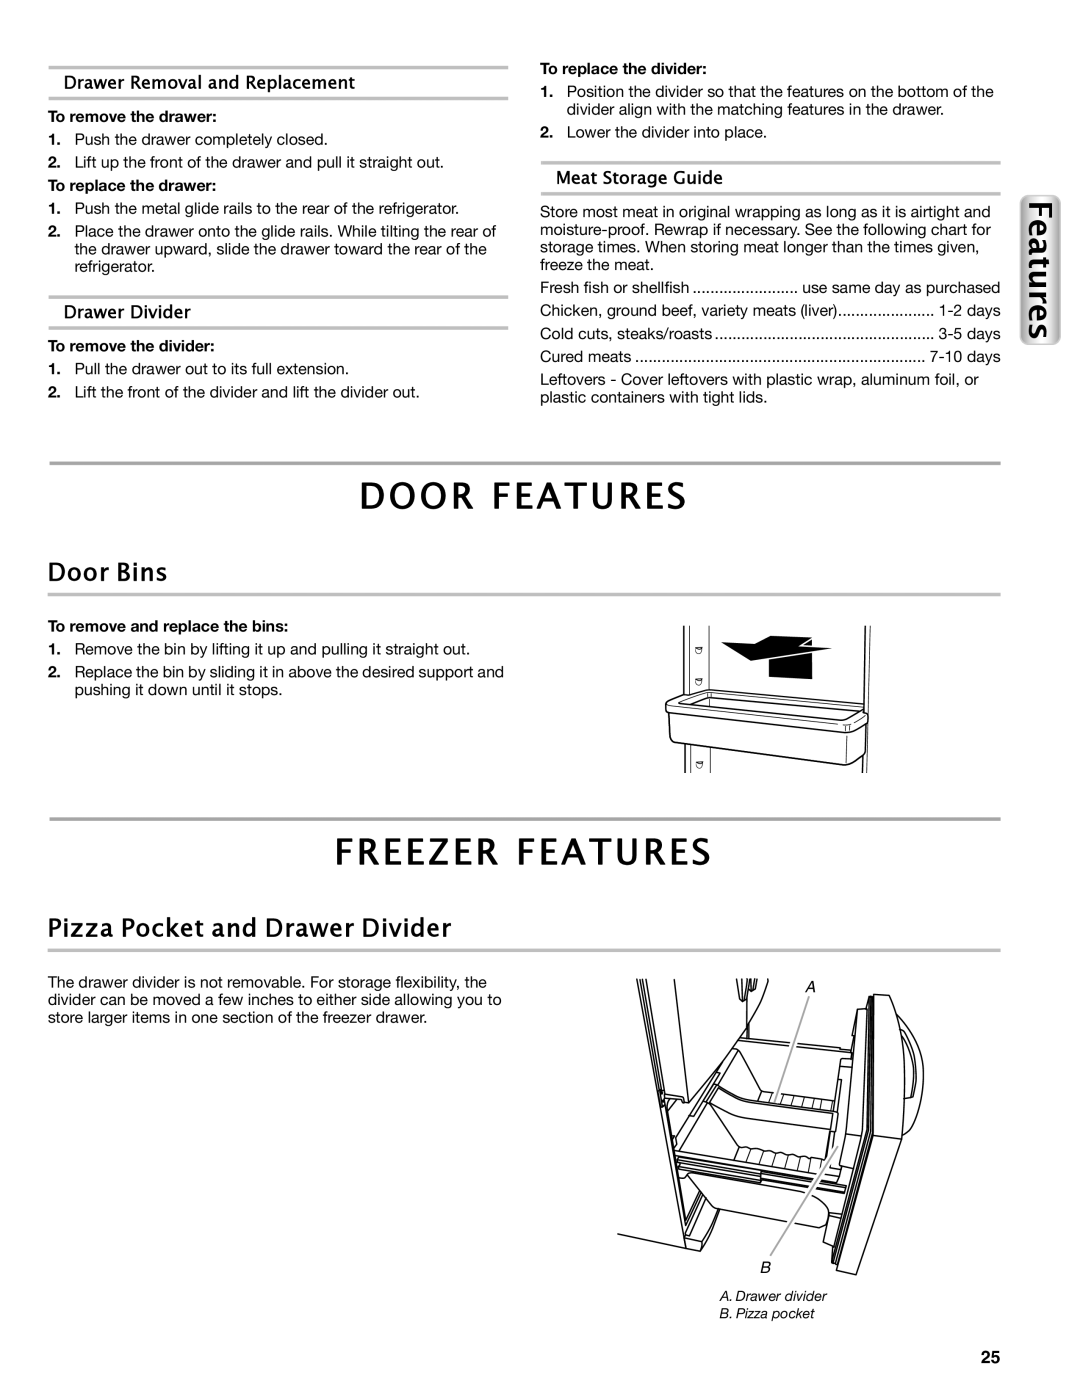 Maytag W10558103A manual Door Features, Freezer Features, Door Bins, Pizza Pocket and Drawer Divider 